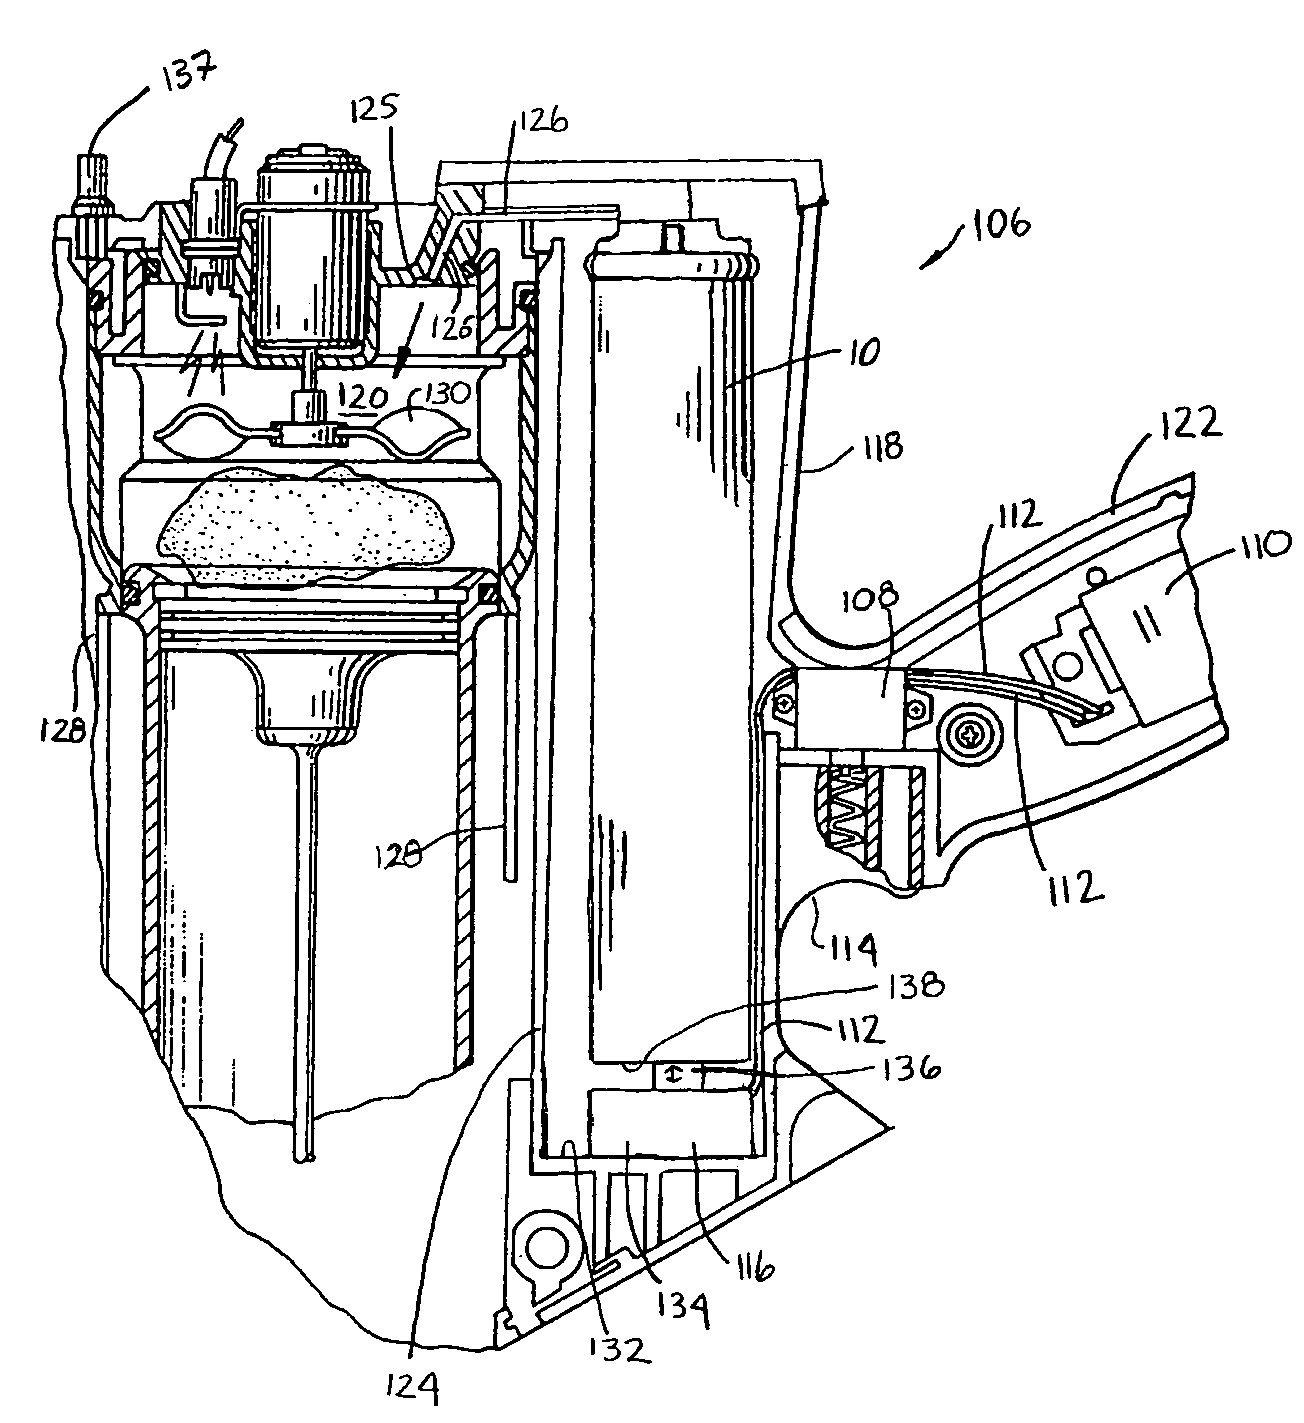 Fuel cell actuator and associated combustion tool